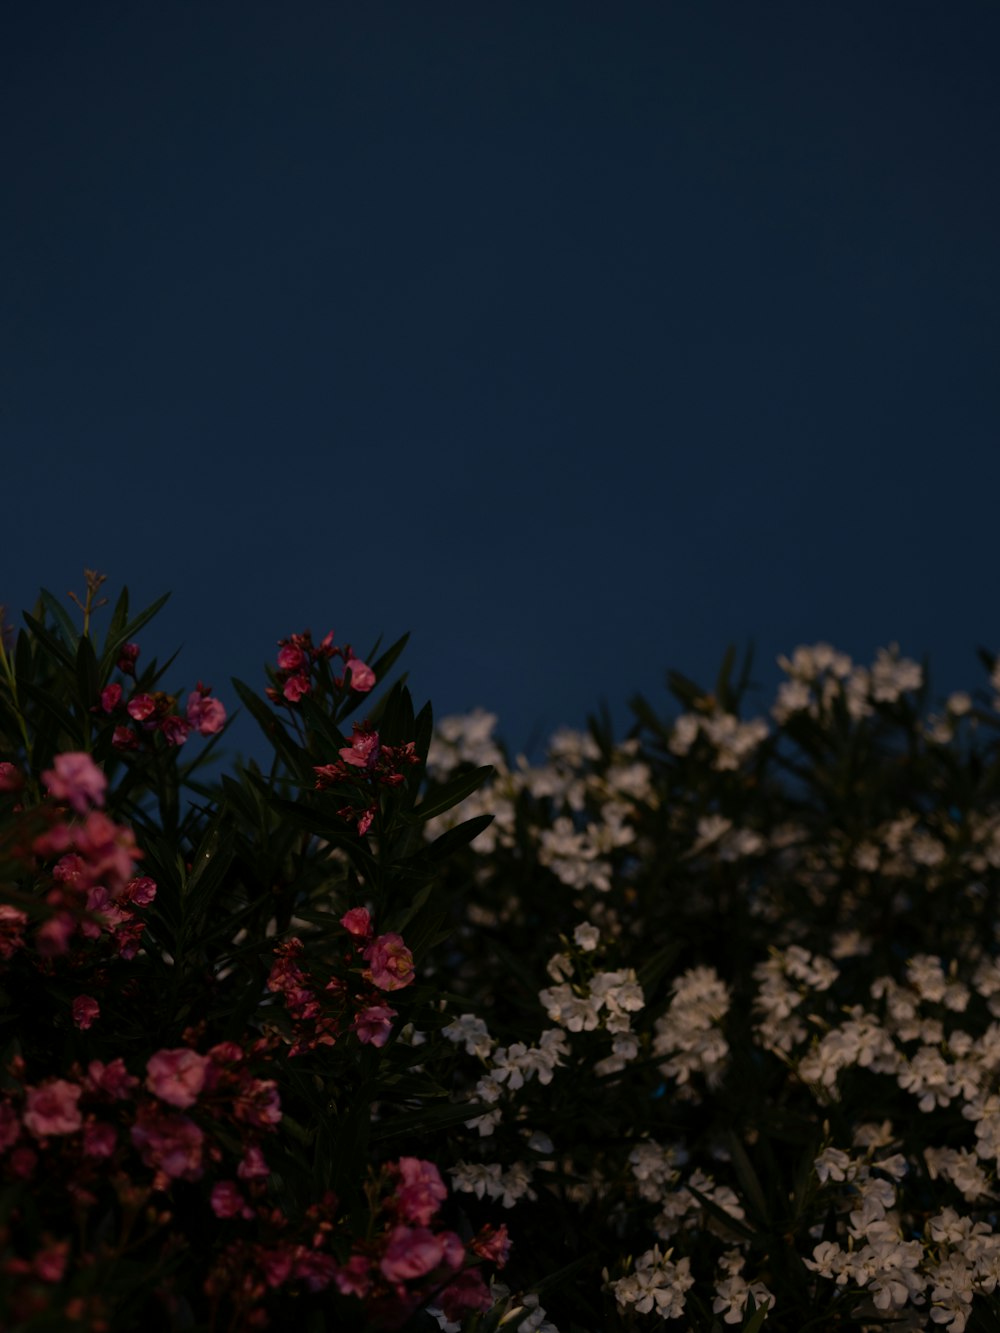 a full moon is seen in the sky above some flowers